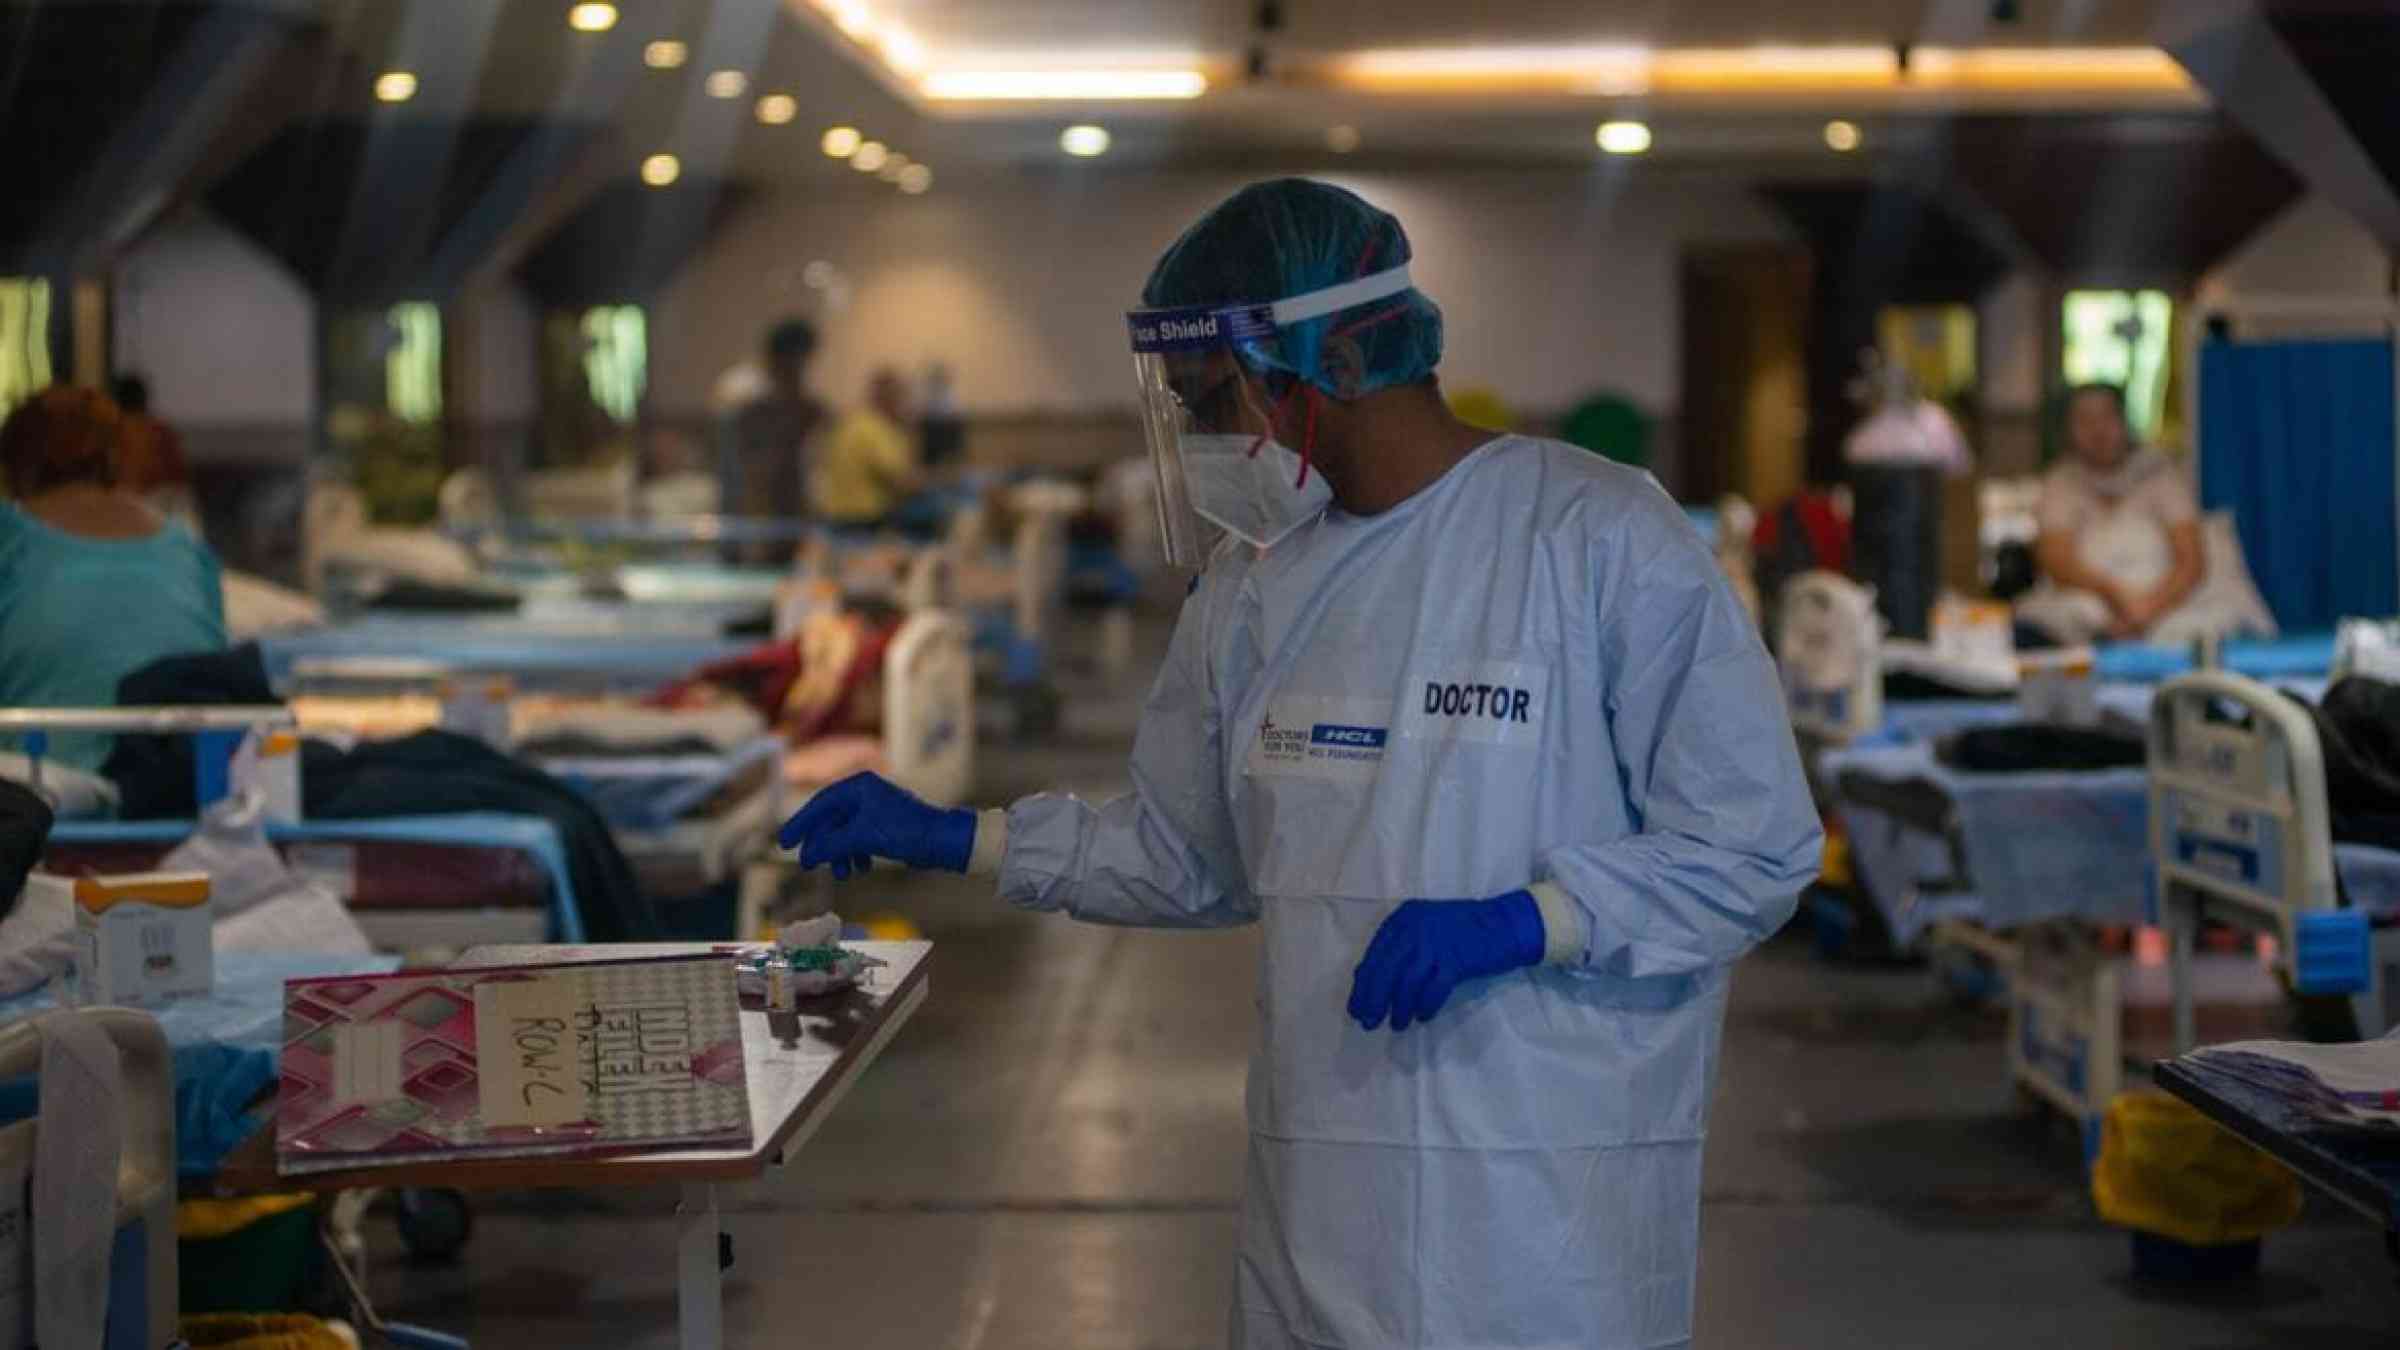 A doctor goes about in an infectious diseases ward set up in New Delhi, India at the height of COVID-19